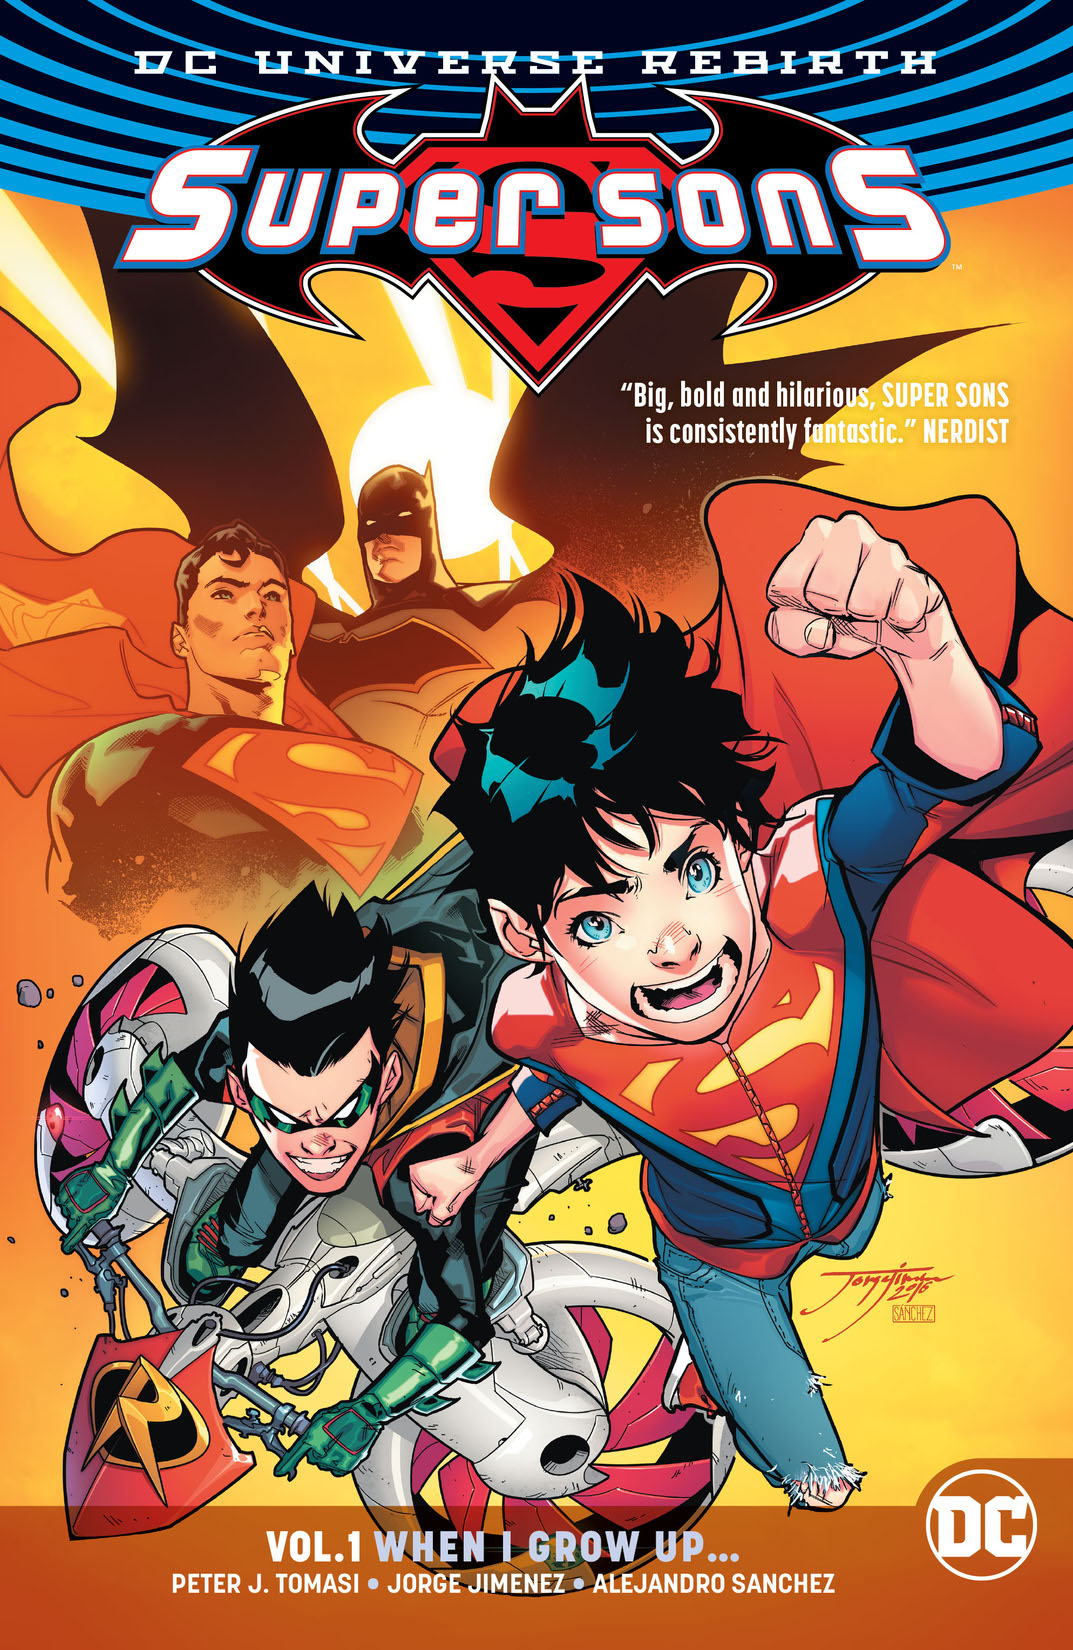 Super Sons Vol. 1: When I Grow Up preview images